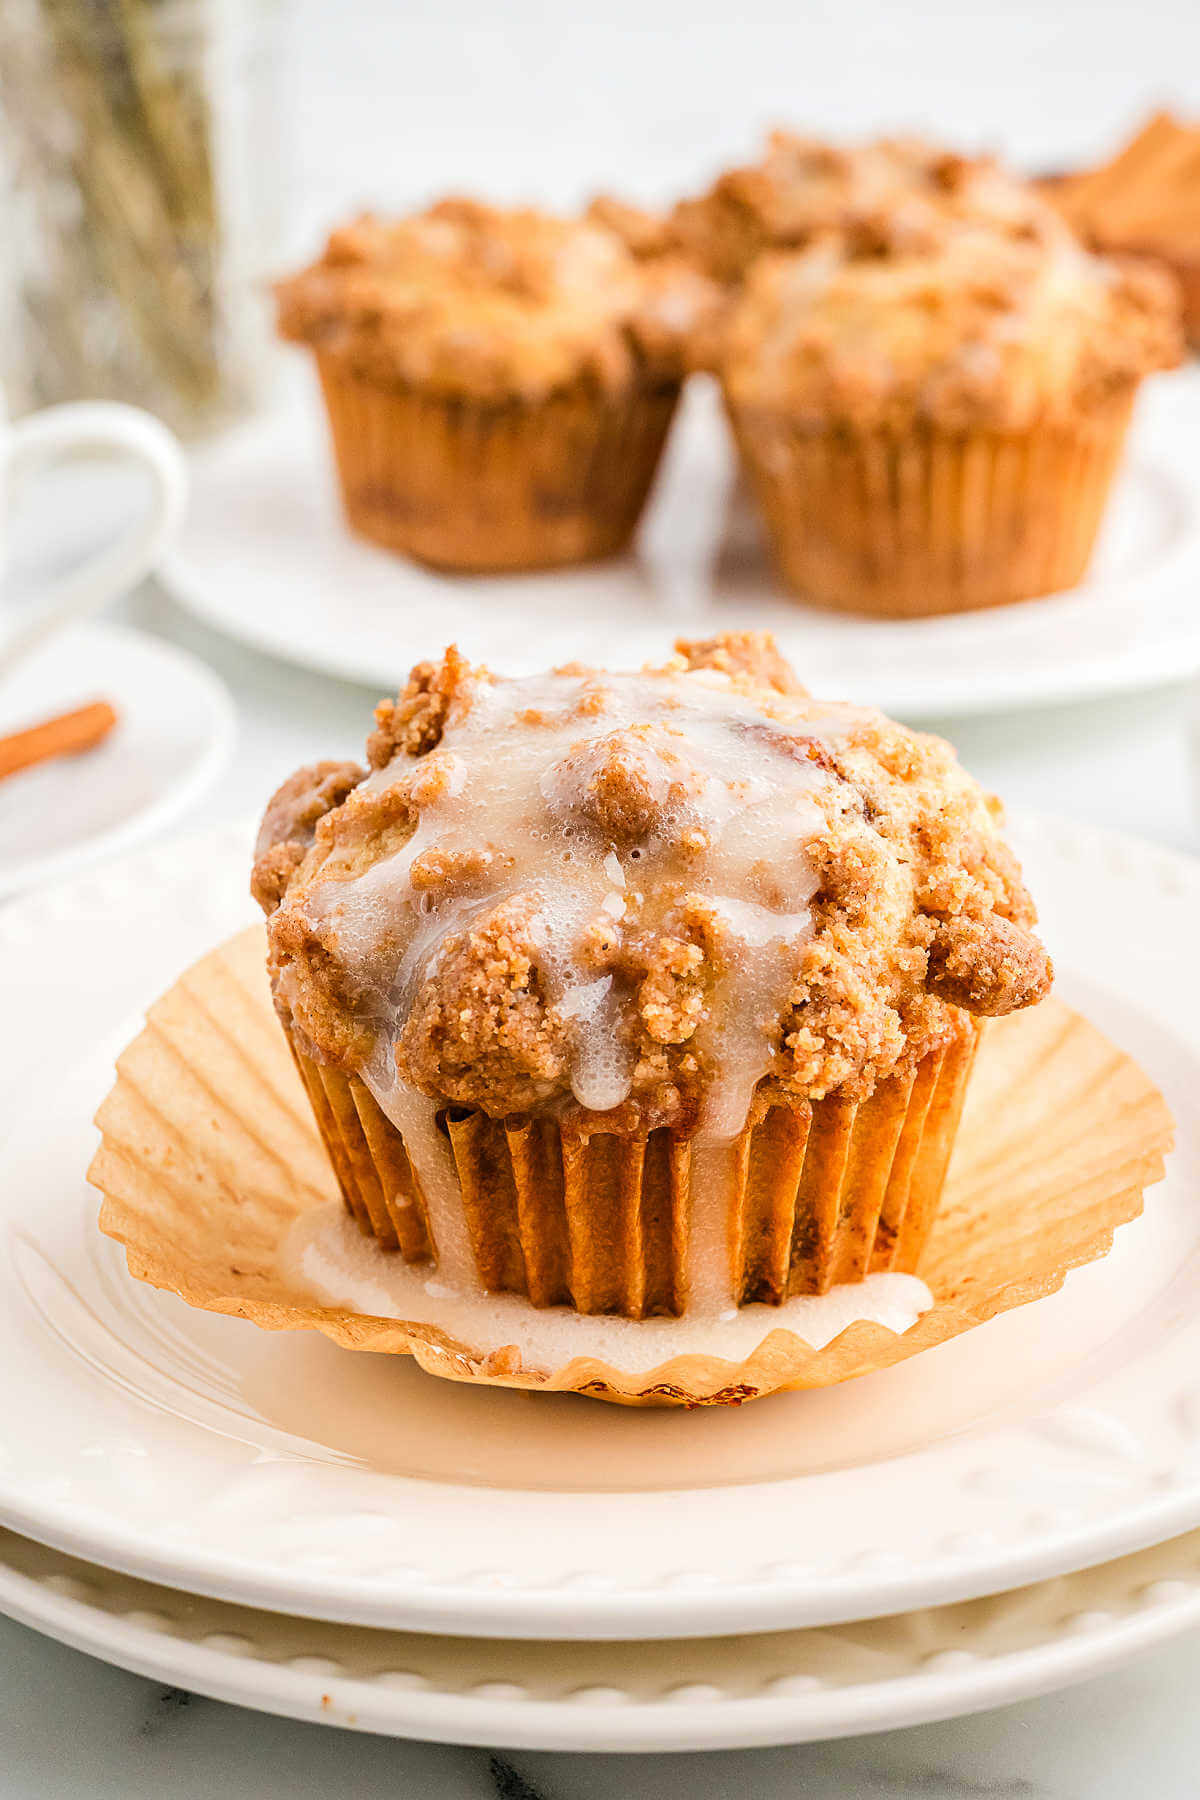 a vanilla iced coffee cake muffin on a serving plate on a table.